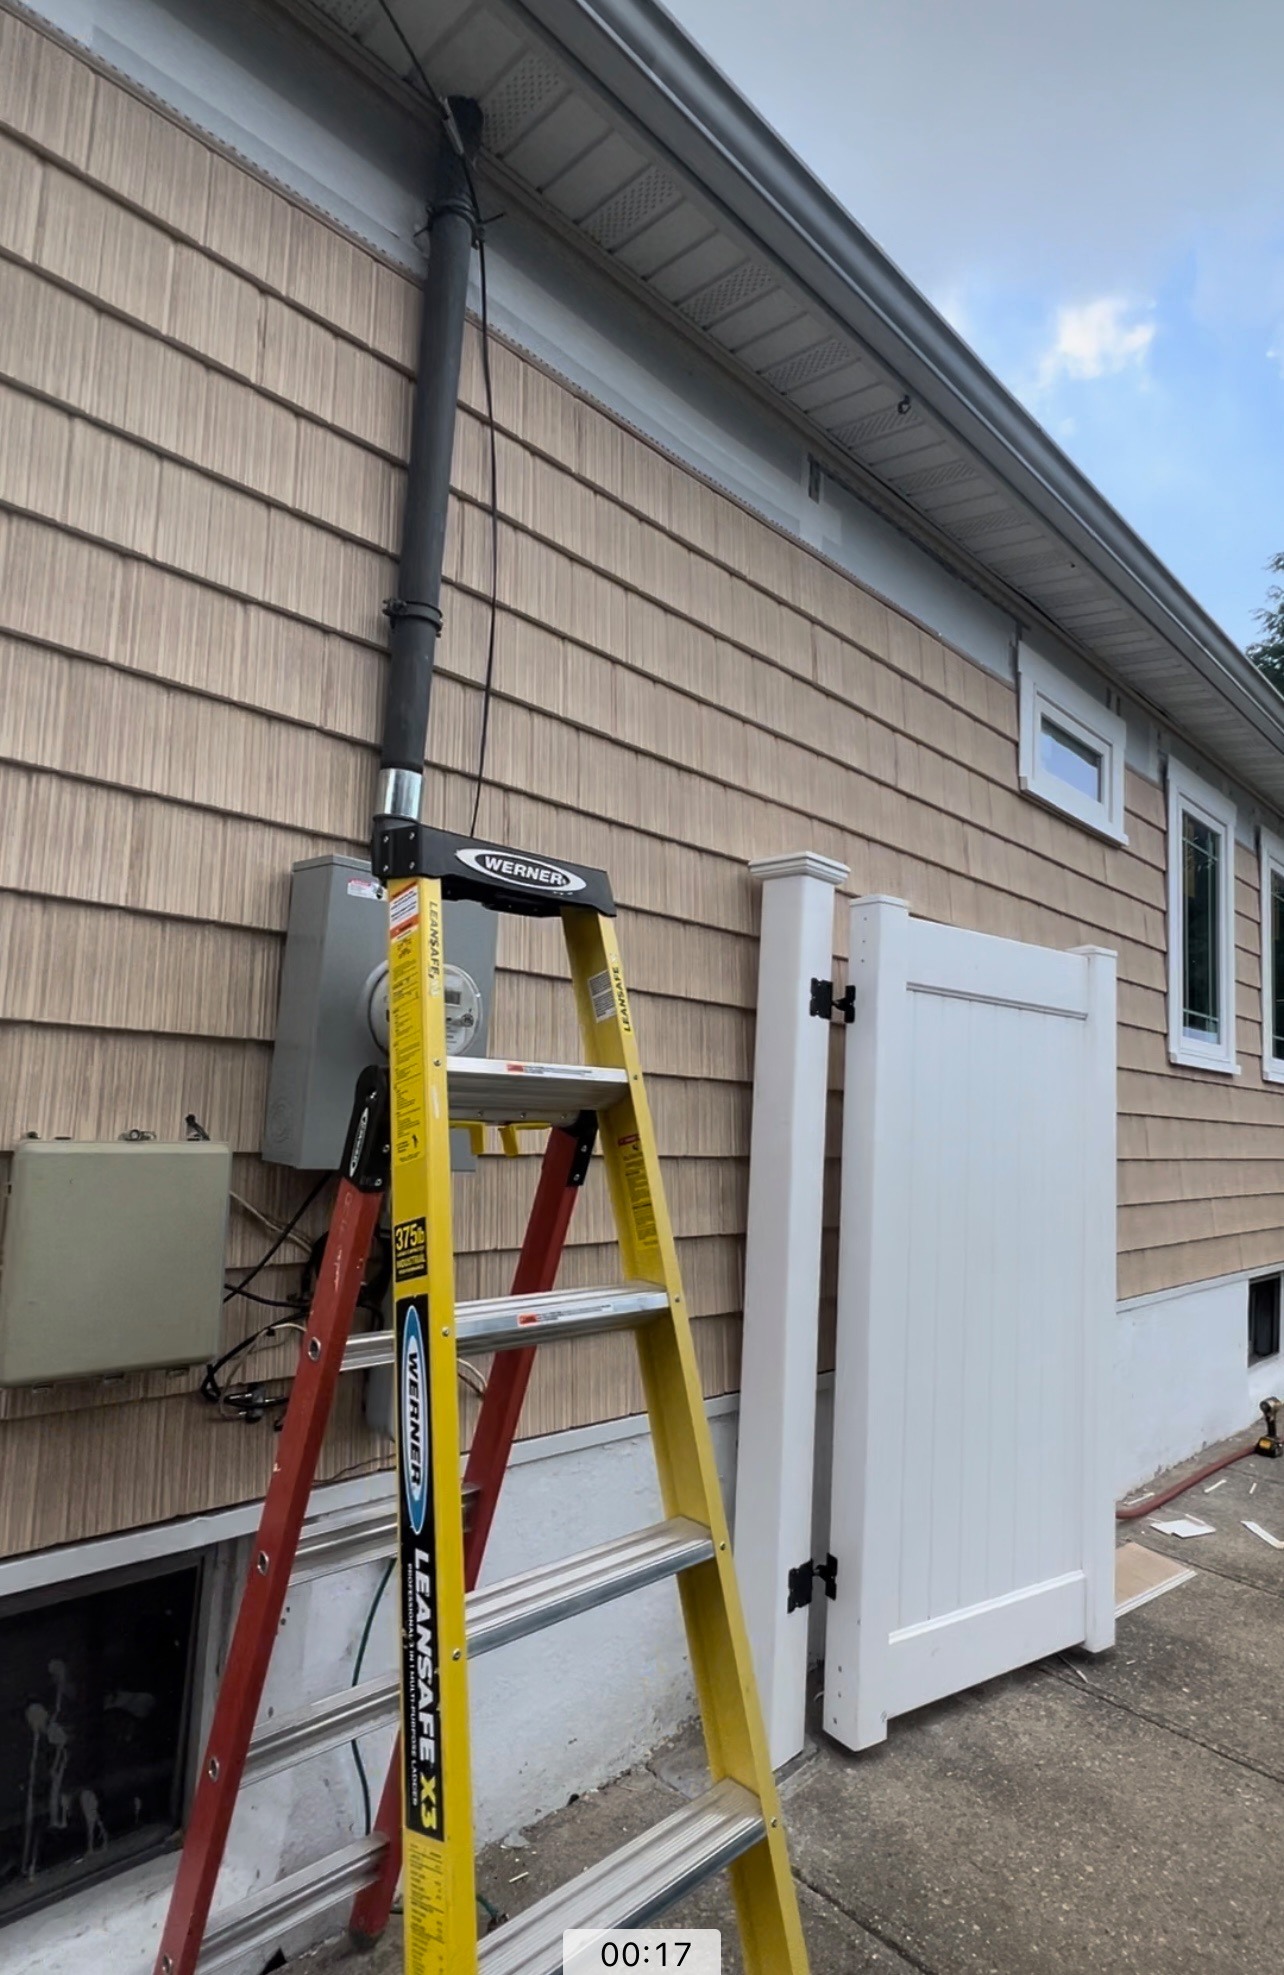 Westlake Royal Building Products™ Donates Siding and Trim to “Family to the Rescue” House in New York